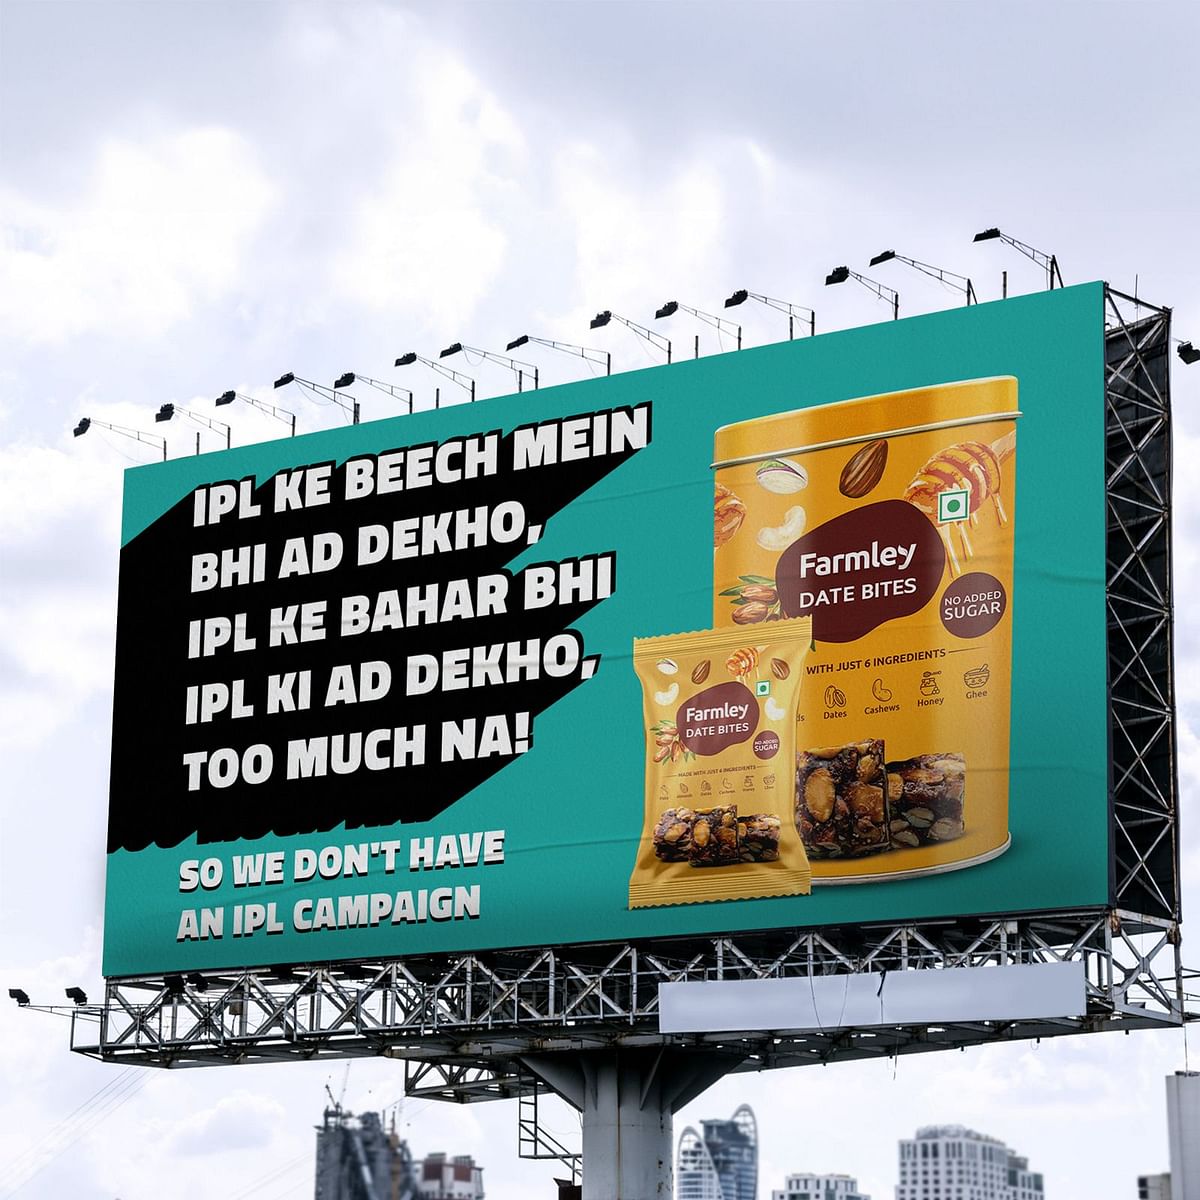 Farmley launches a quirky social media campaign, titled 'We Don't Have An IPL Campaign'